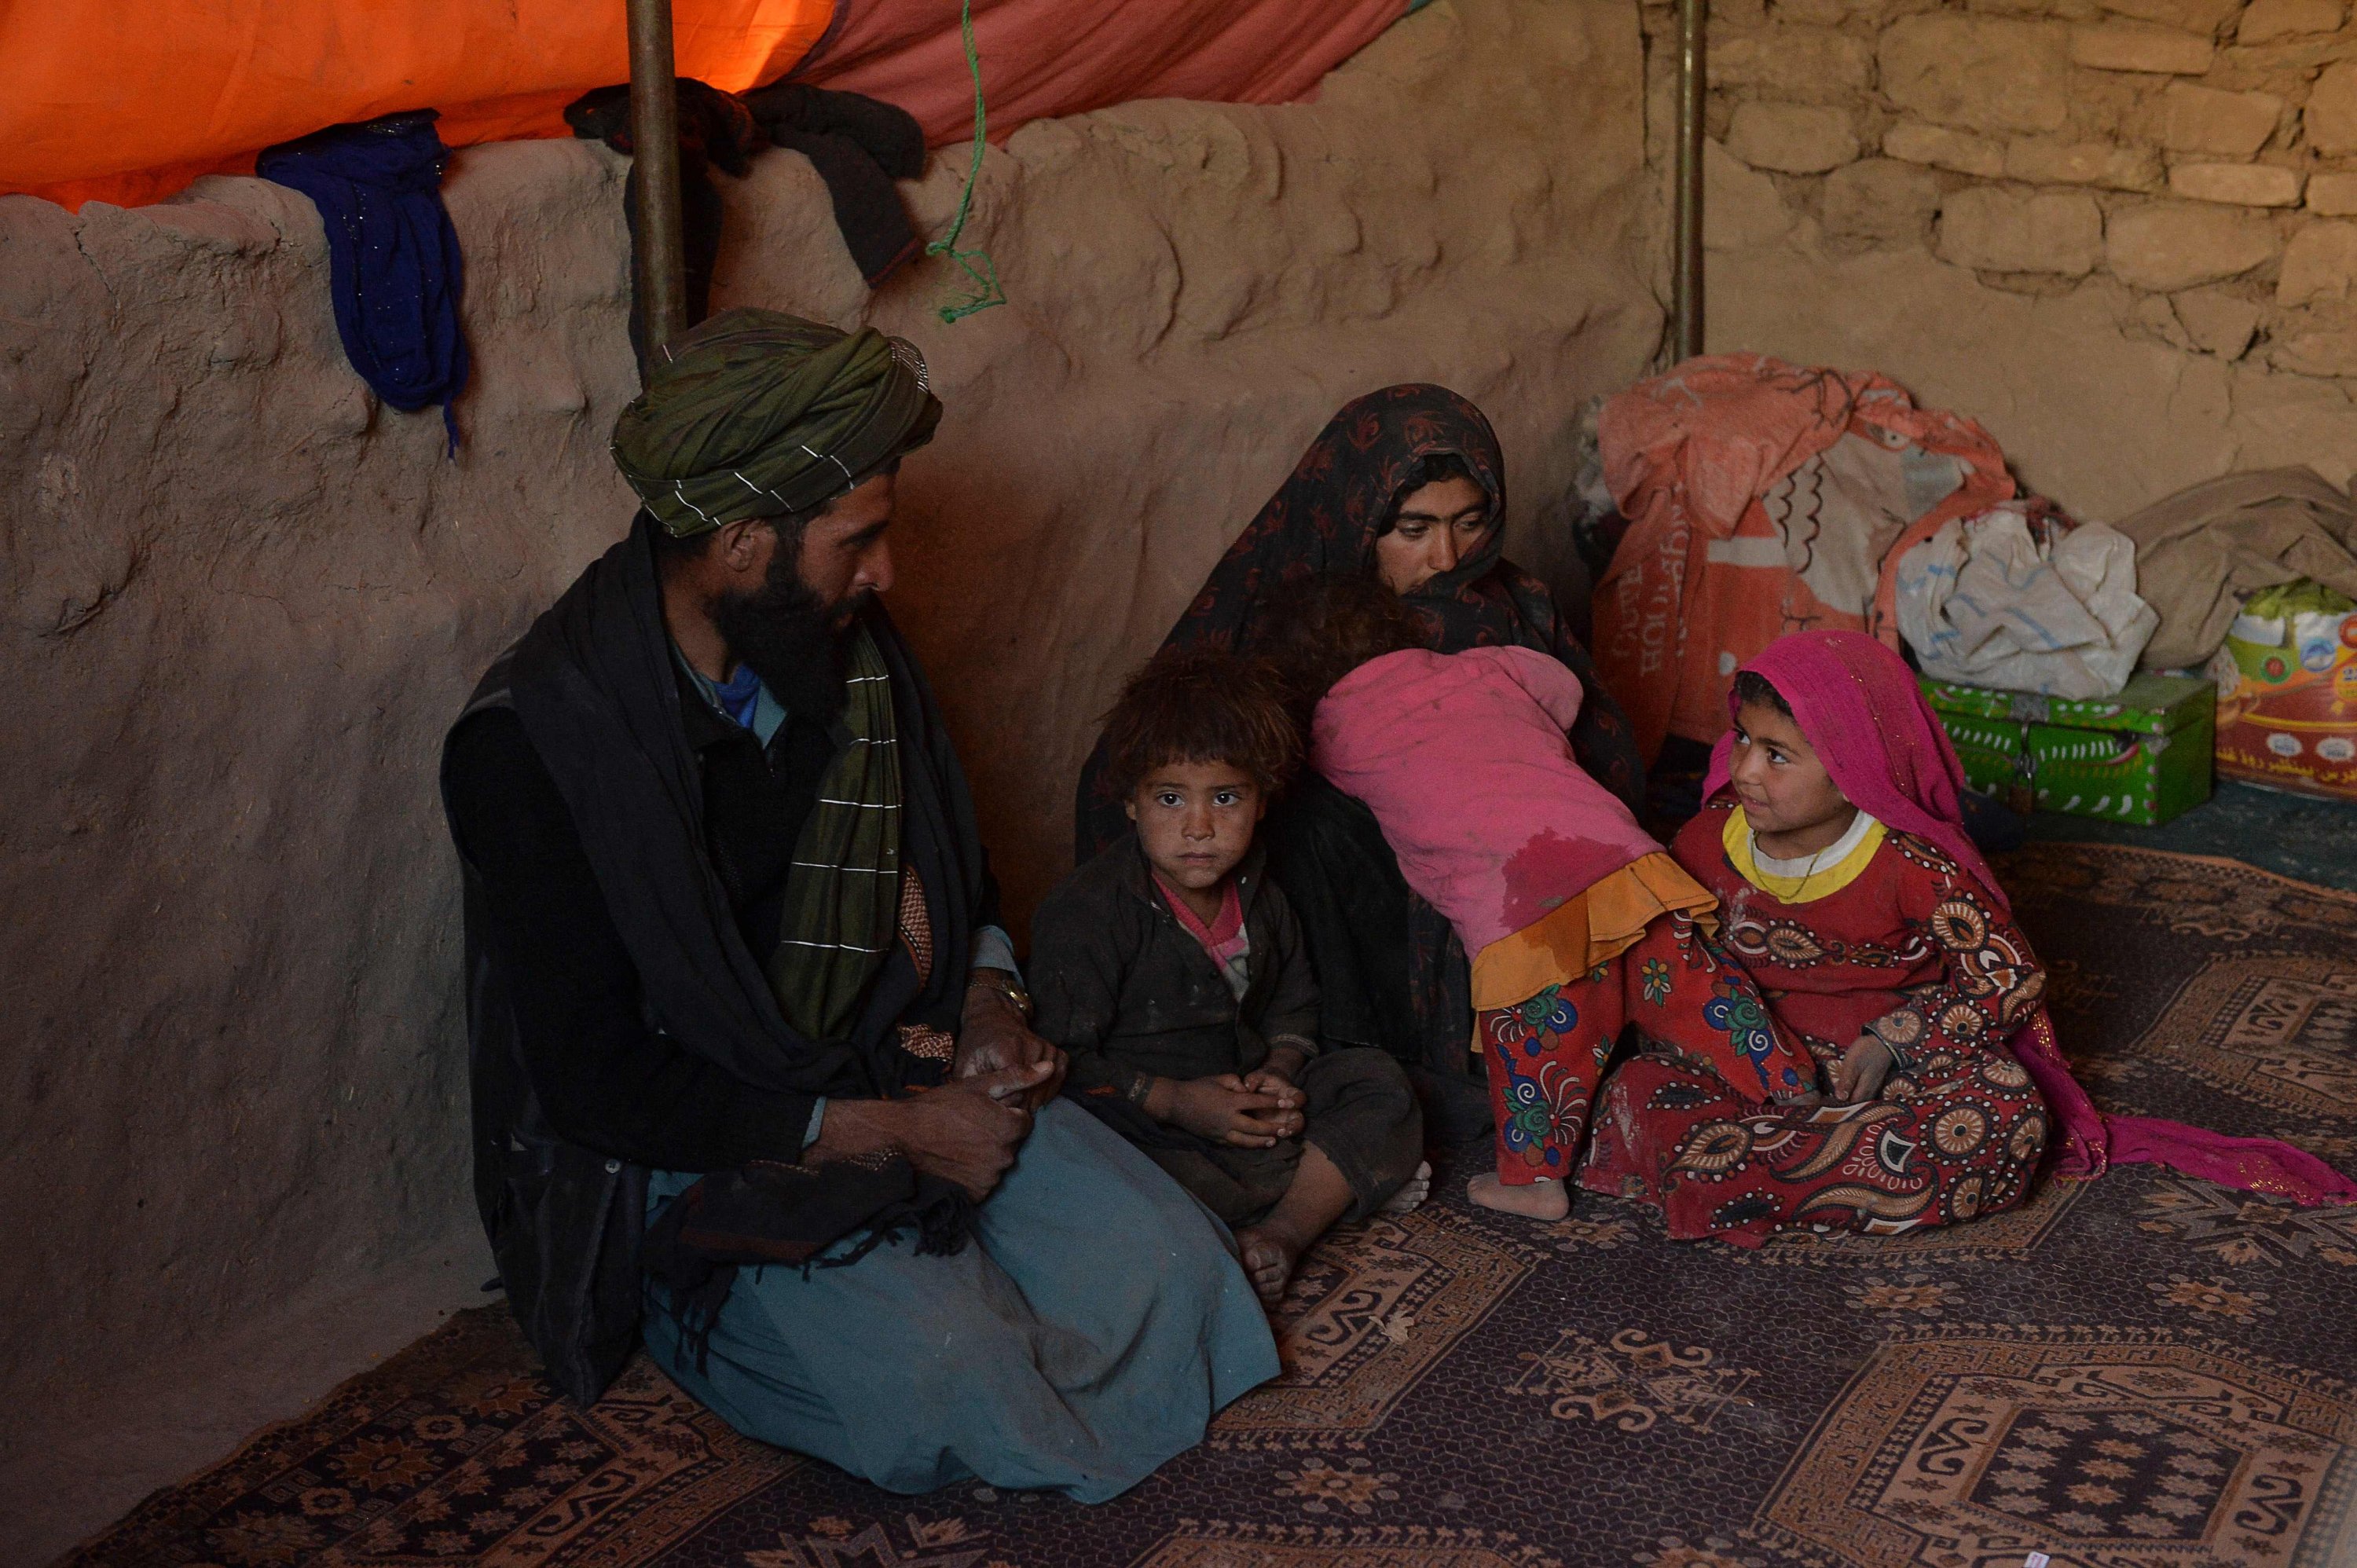 Children Farishteh (R) and Shokriya (2R), who were recently sold to the families of their future husbands, sitting with their parents inside a tent at the Shamal Darya Internally Displaced People (IDP) camp in Qala-i-Naw, Badghis Province, Afghanistan, Oct. 14, 2021. (AFP Photo)